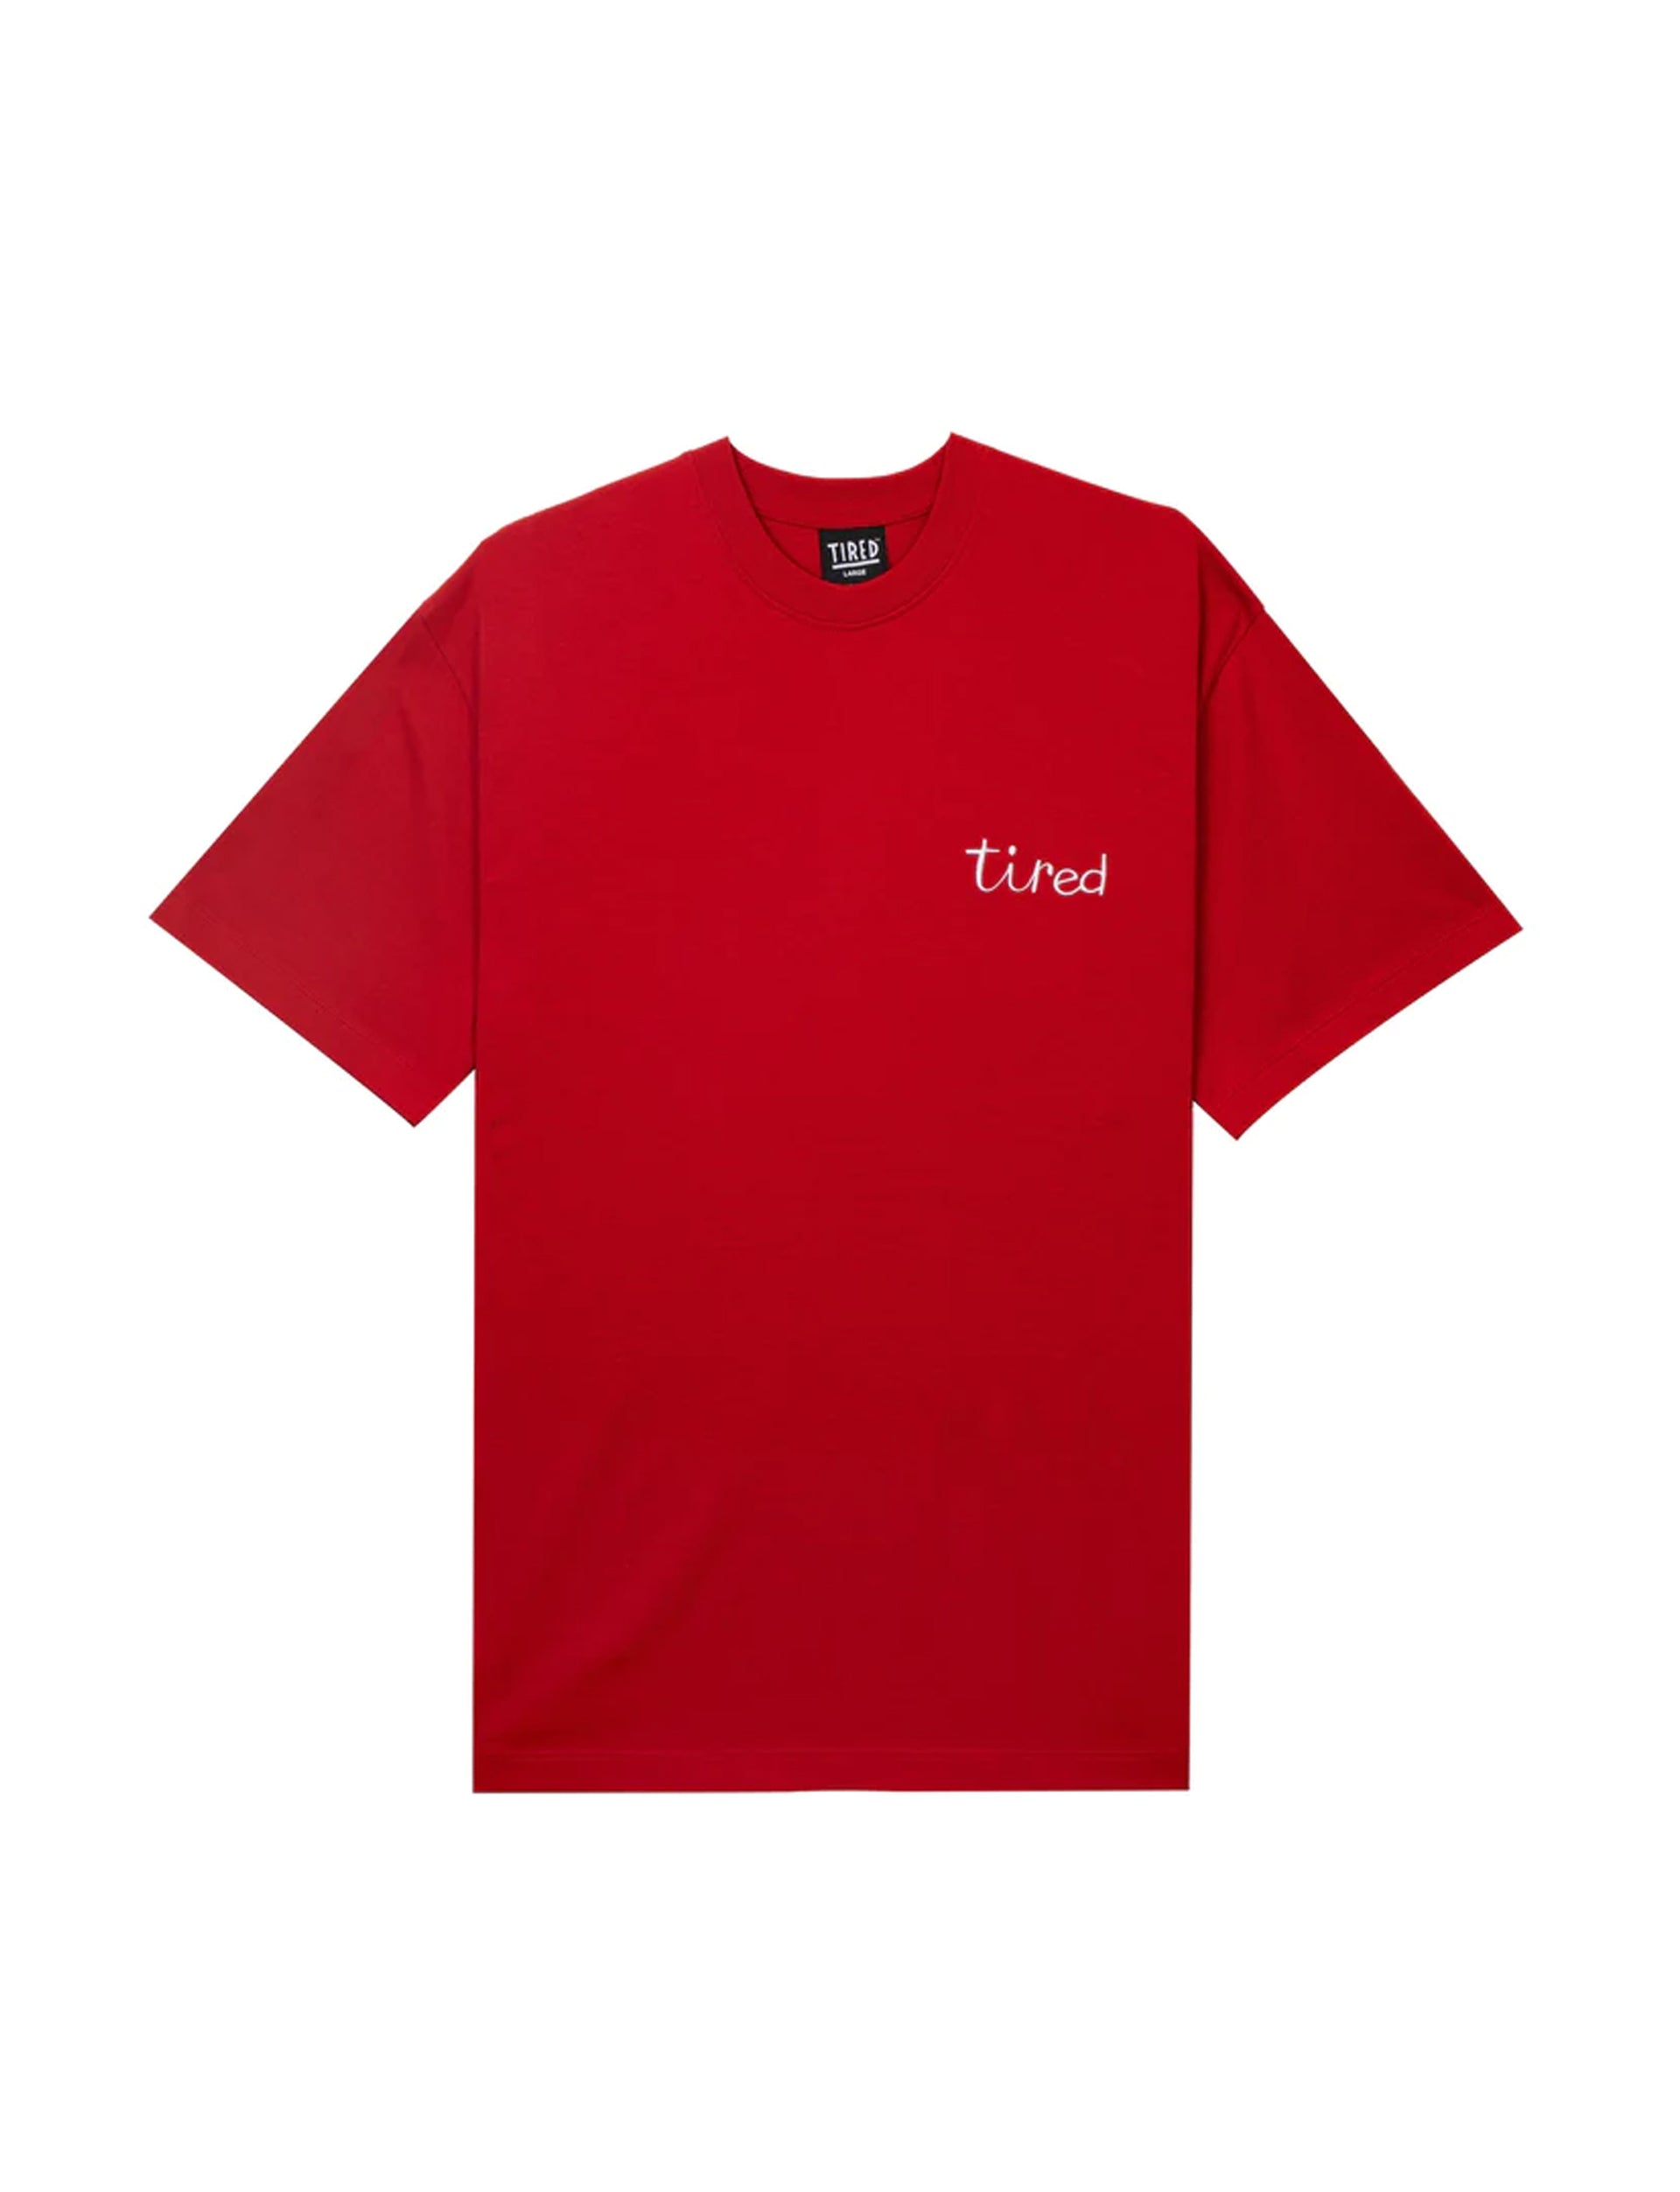 TIRED THE SHIP HAS SAILED SS TEE RED